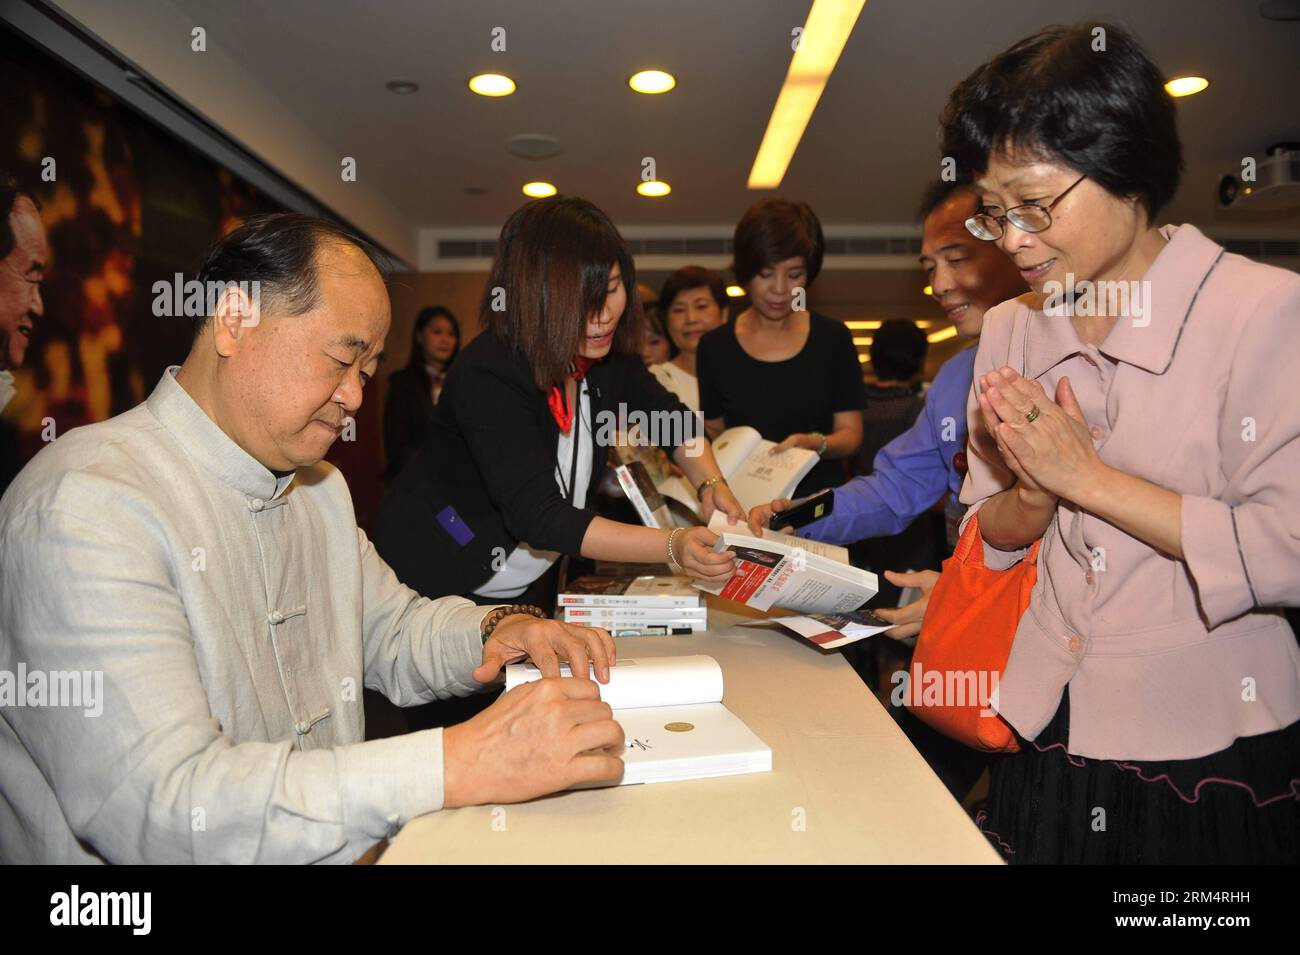 Bildnummer: 60509403  Datum: 21.09.2013  Copyright: imago/Xinhua (130921) -- TAIPEI, Sept. 21, 2013 (Xinhua) -- Chinese author and Nobel prize winner Mo Yan signs his books for readers at an event to promote his new book Grand Ceremony, which documents his trip to Sweden to receive the Nobel Prize in Literature and includes his speeches, interviews and diary entries, in Taipei, southeast China s Taiwan, Sept. 21, 2013. (Xinhua/Lu Peng) (wqq) CHINA-TAIPEI-MO YAN-NEW BOOK-PROMOTION (CN) PUBLICATIONxNOTxINxCHN Kultur People Literatur x0x xkg 2013 quer      60509403 Date 21 09 2013 Copyright Imago Stock Photo